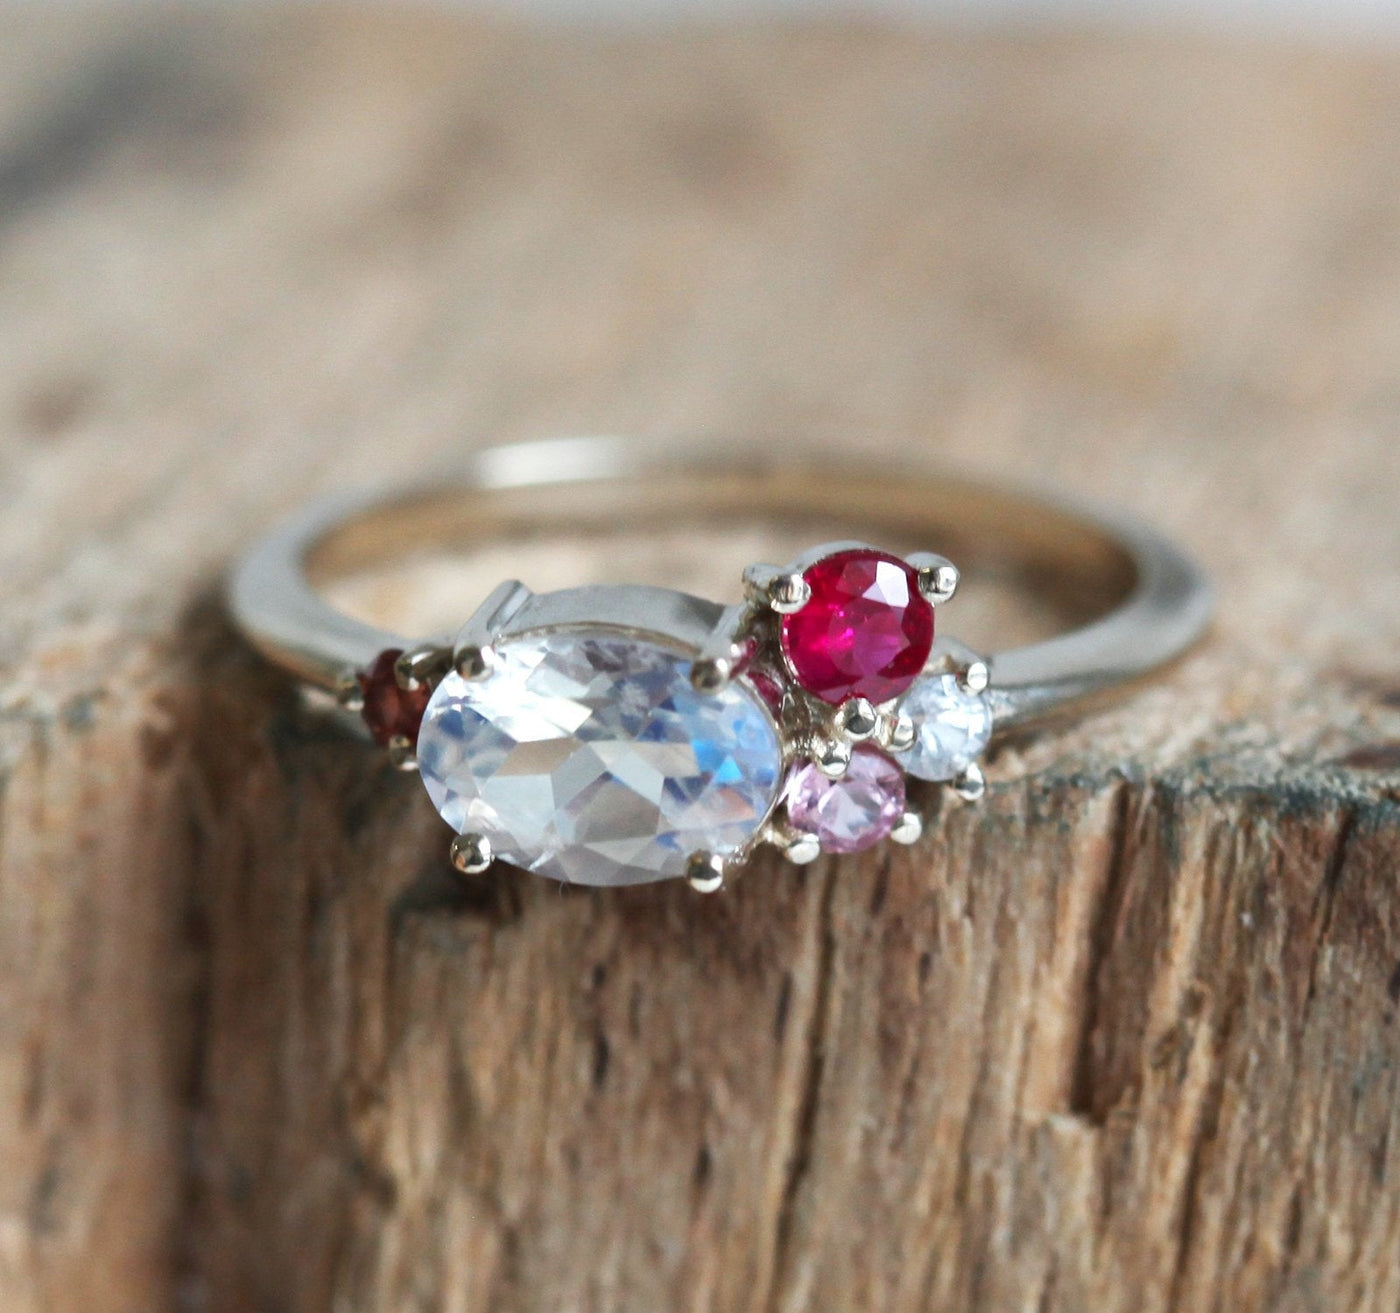 Oval-shaped white moonstone cluster ring with ruby, garnet and sapphire stones